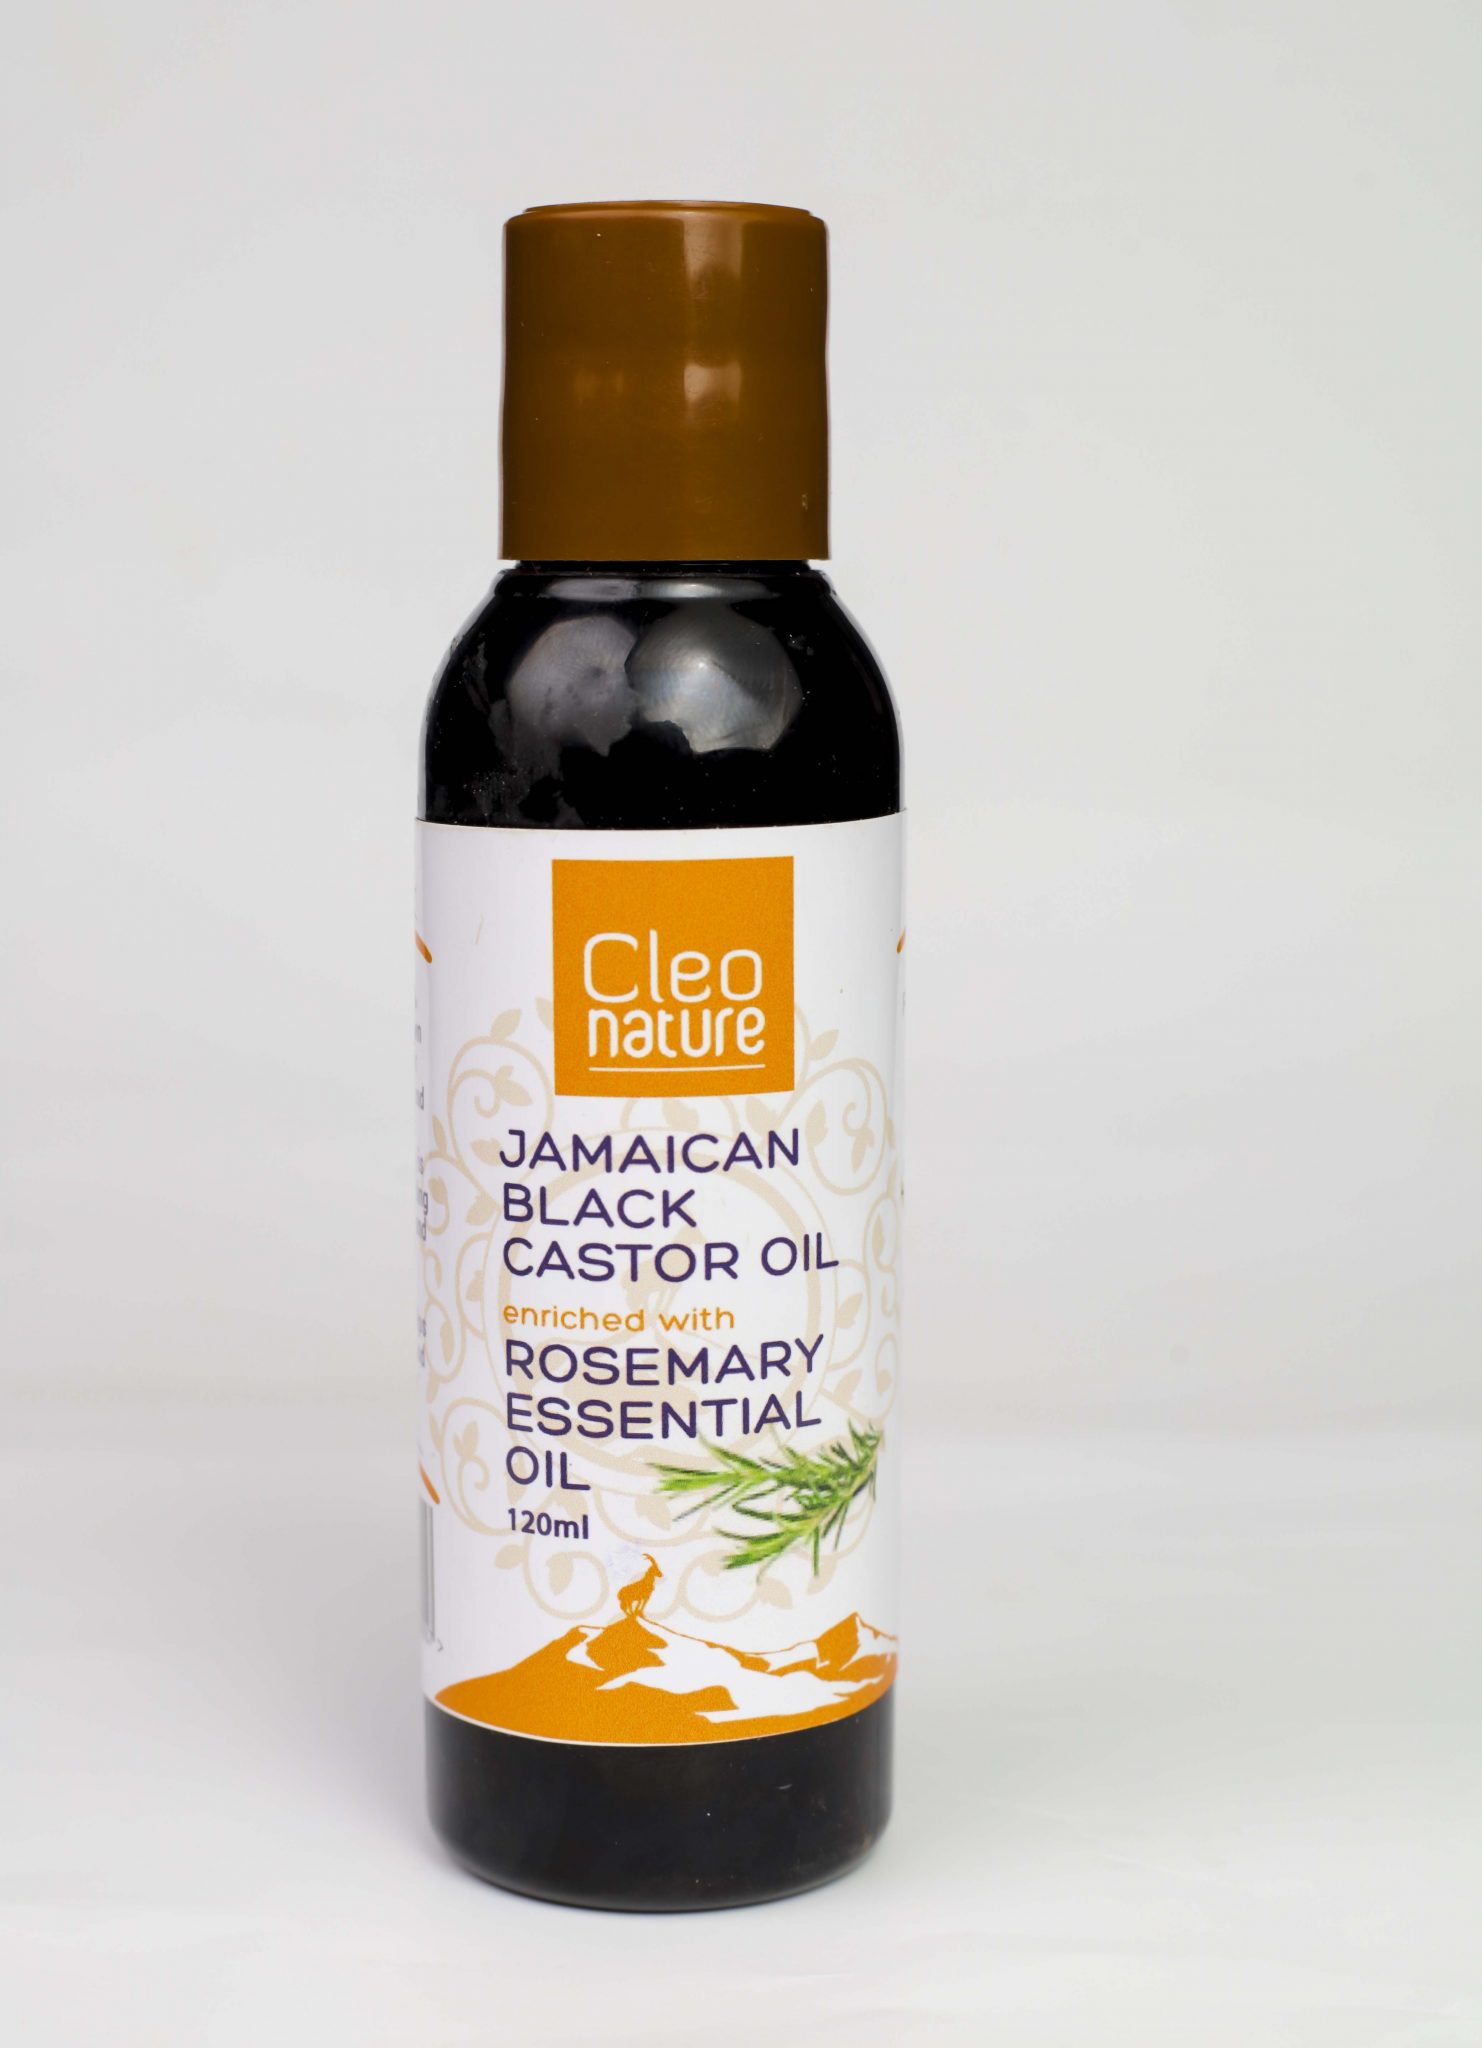 Pure Jamaican Black Castor Oil enriched with Rosemary – Cleo Nature